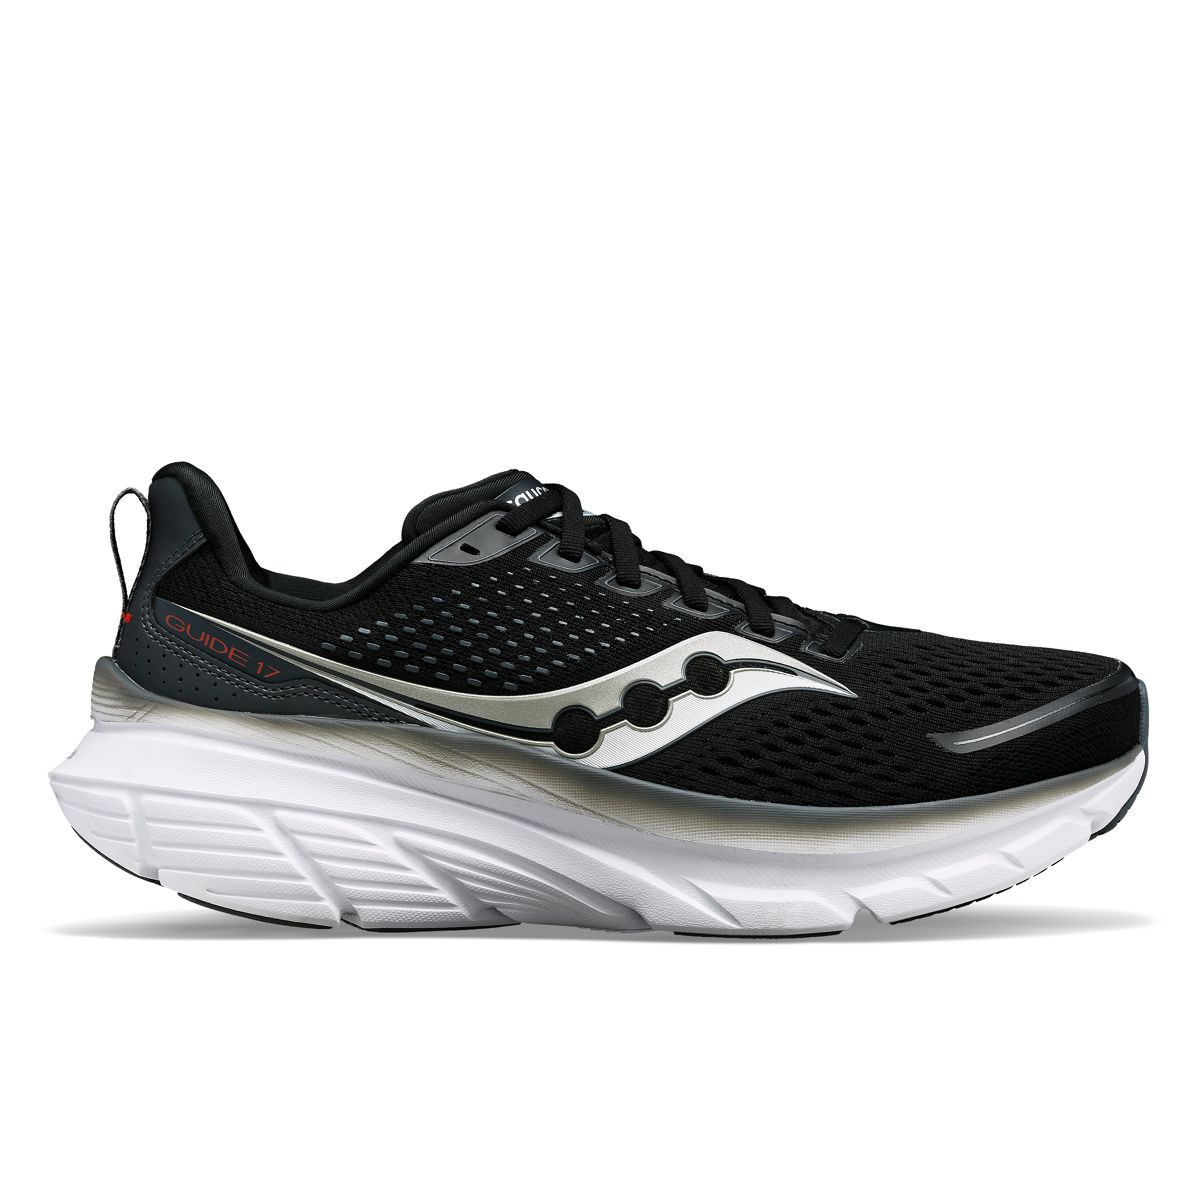 Men's Guide 17 Running Shoes | Saucony